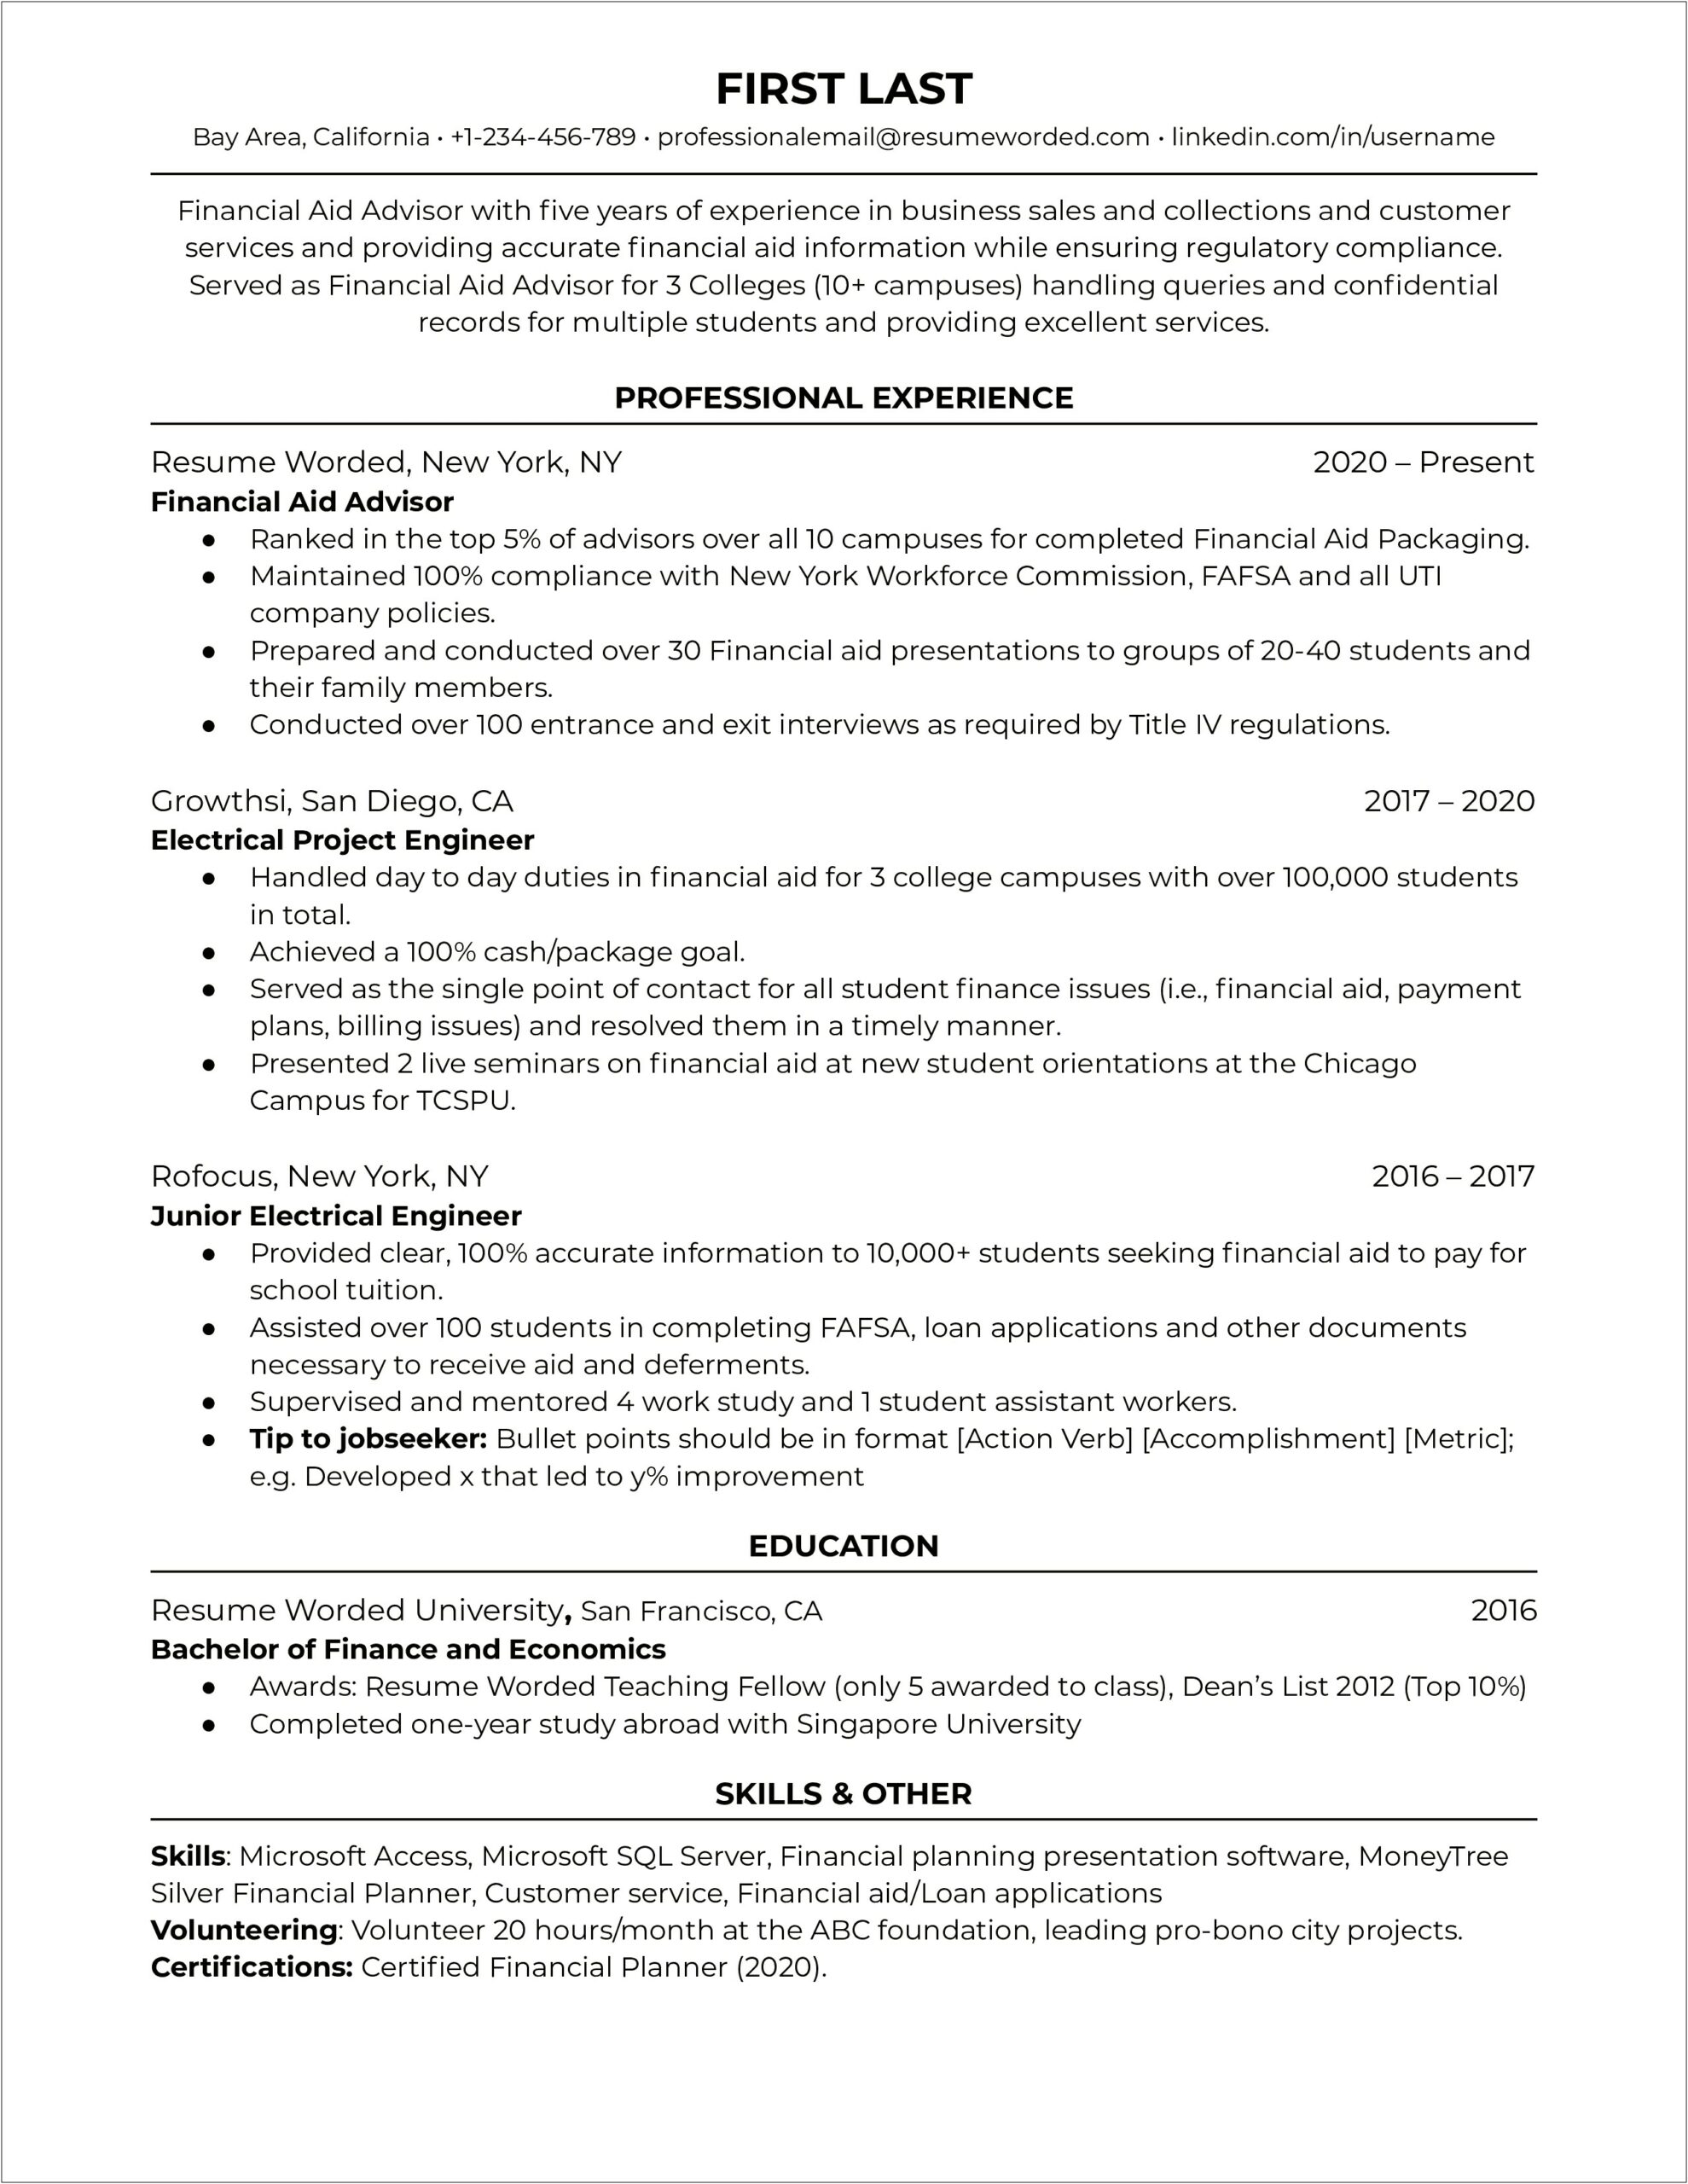 Financial Aid Officer Resume Objective